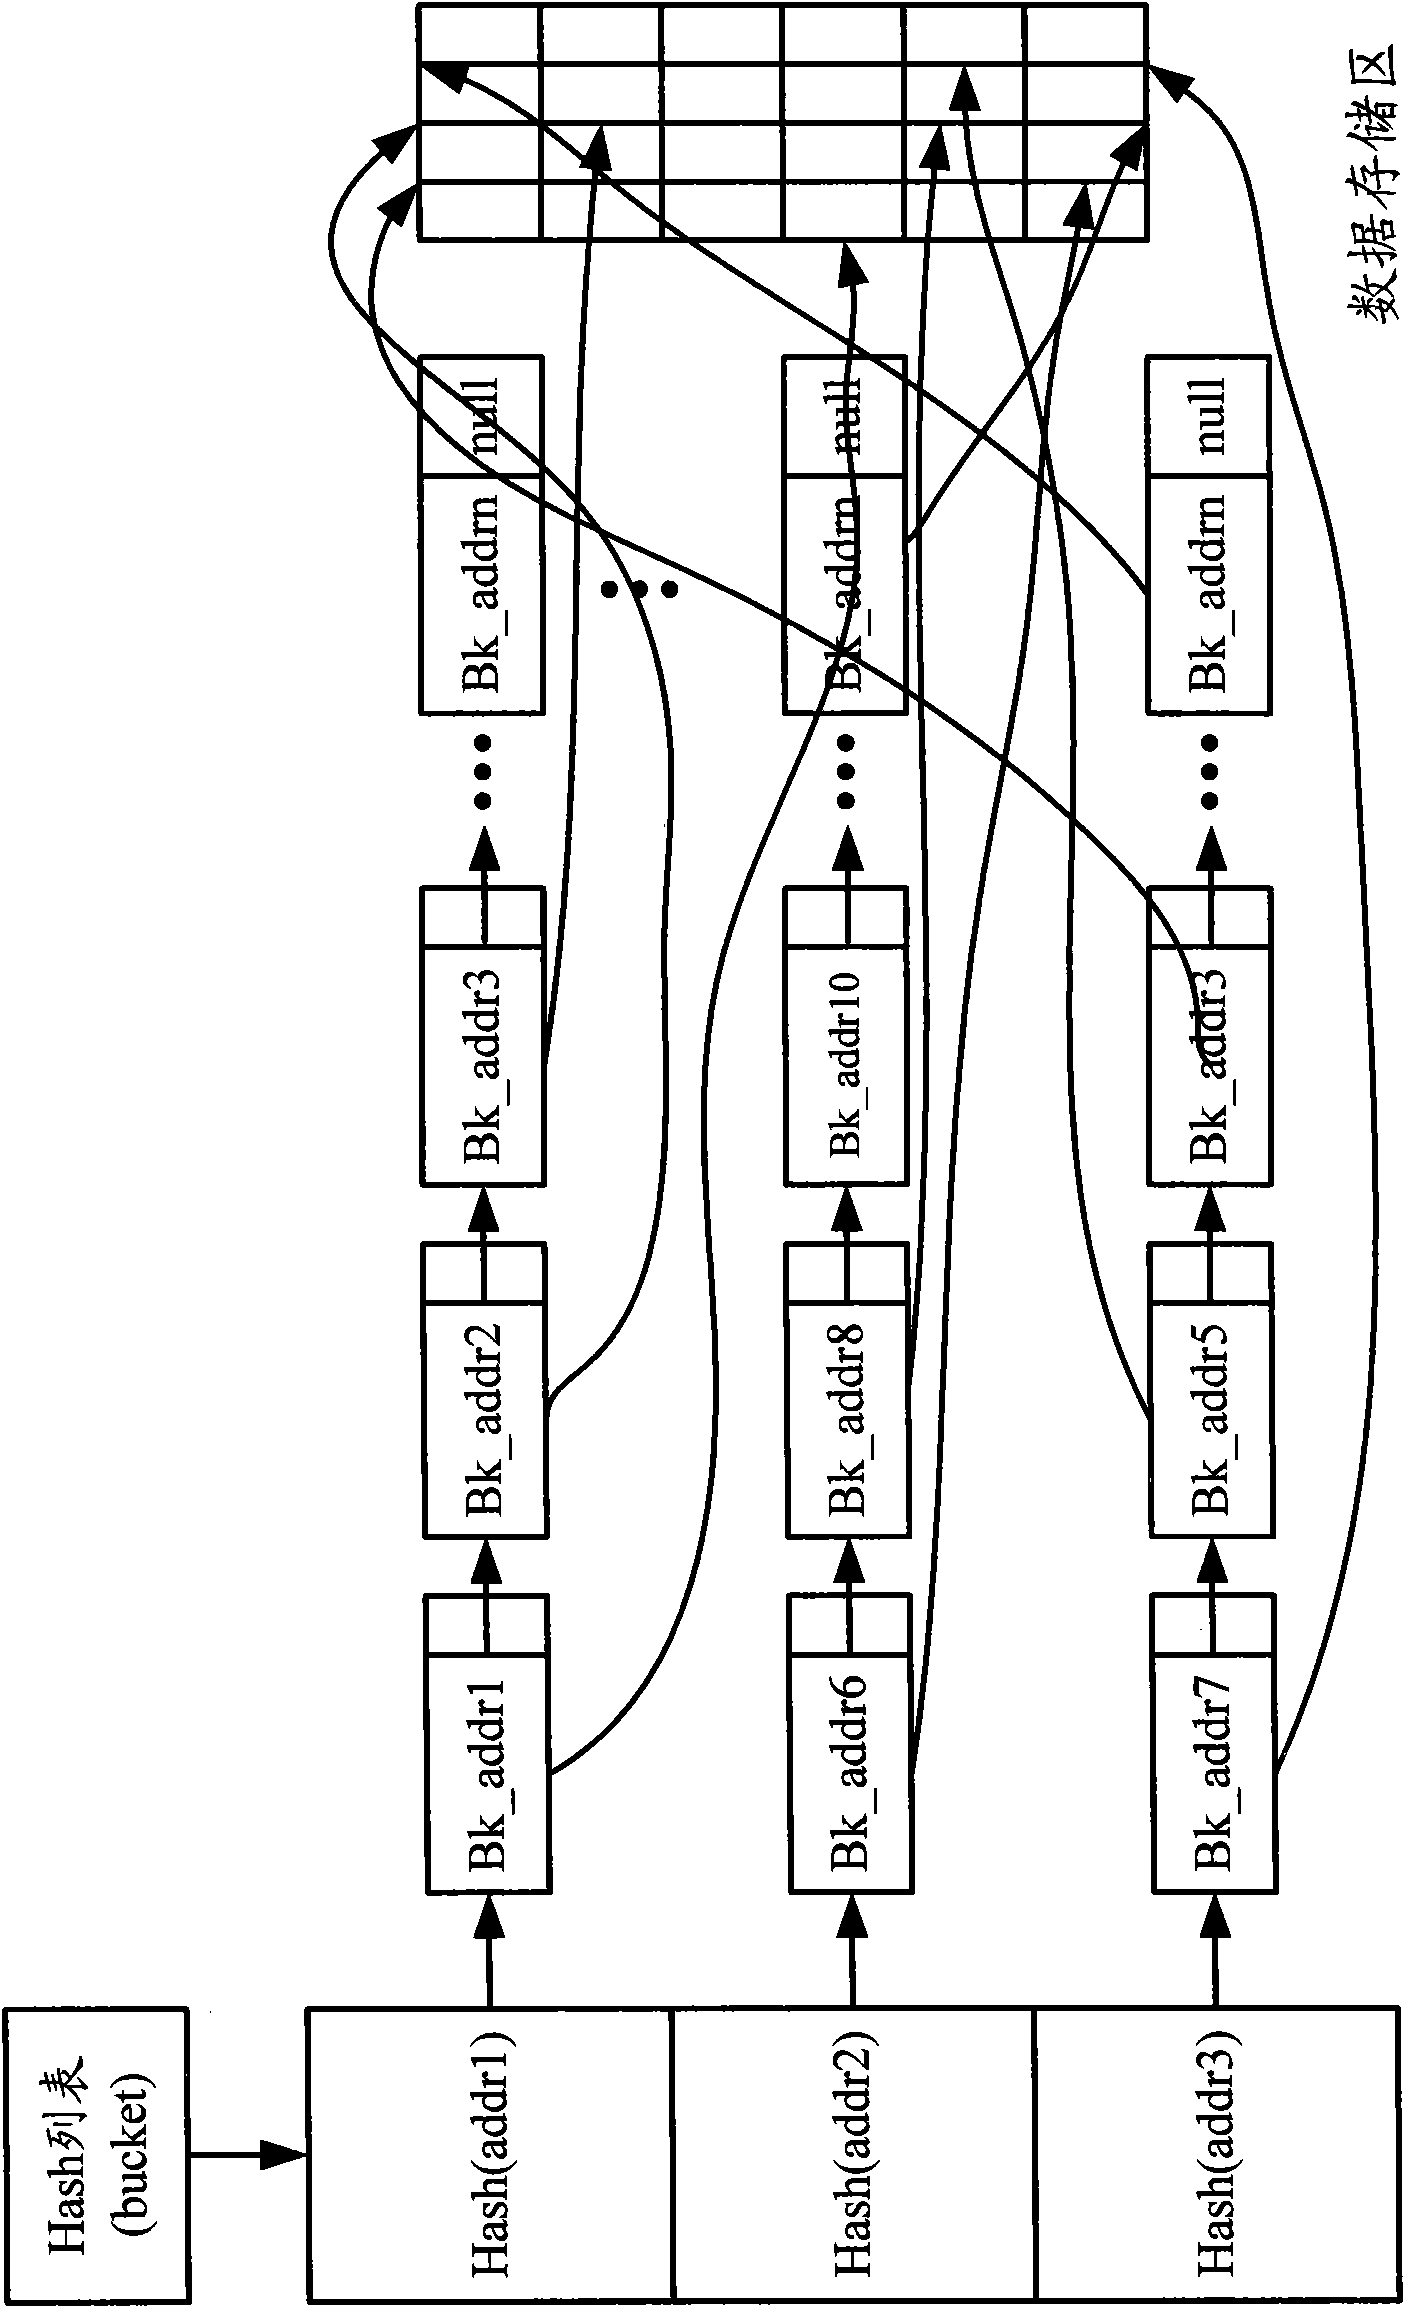 Method and system for dynamically enhancing input/output (I/O) throughput of server